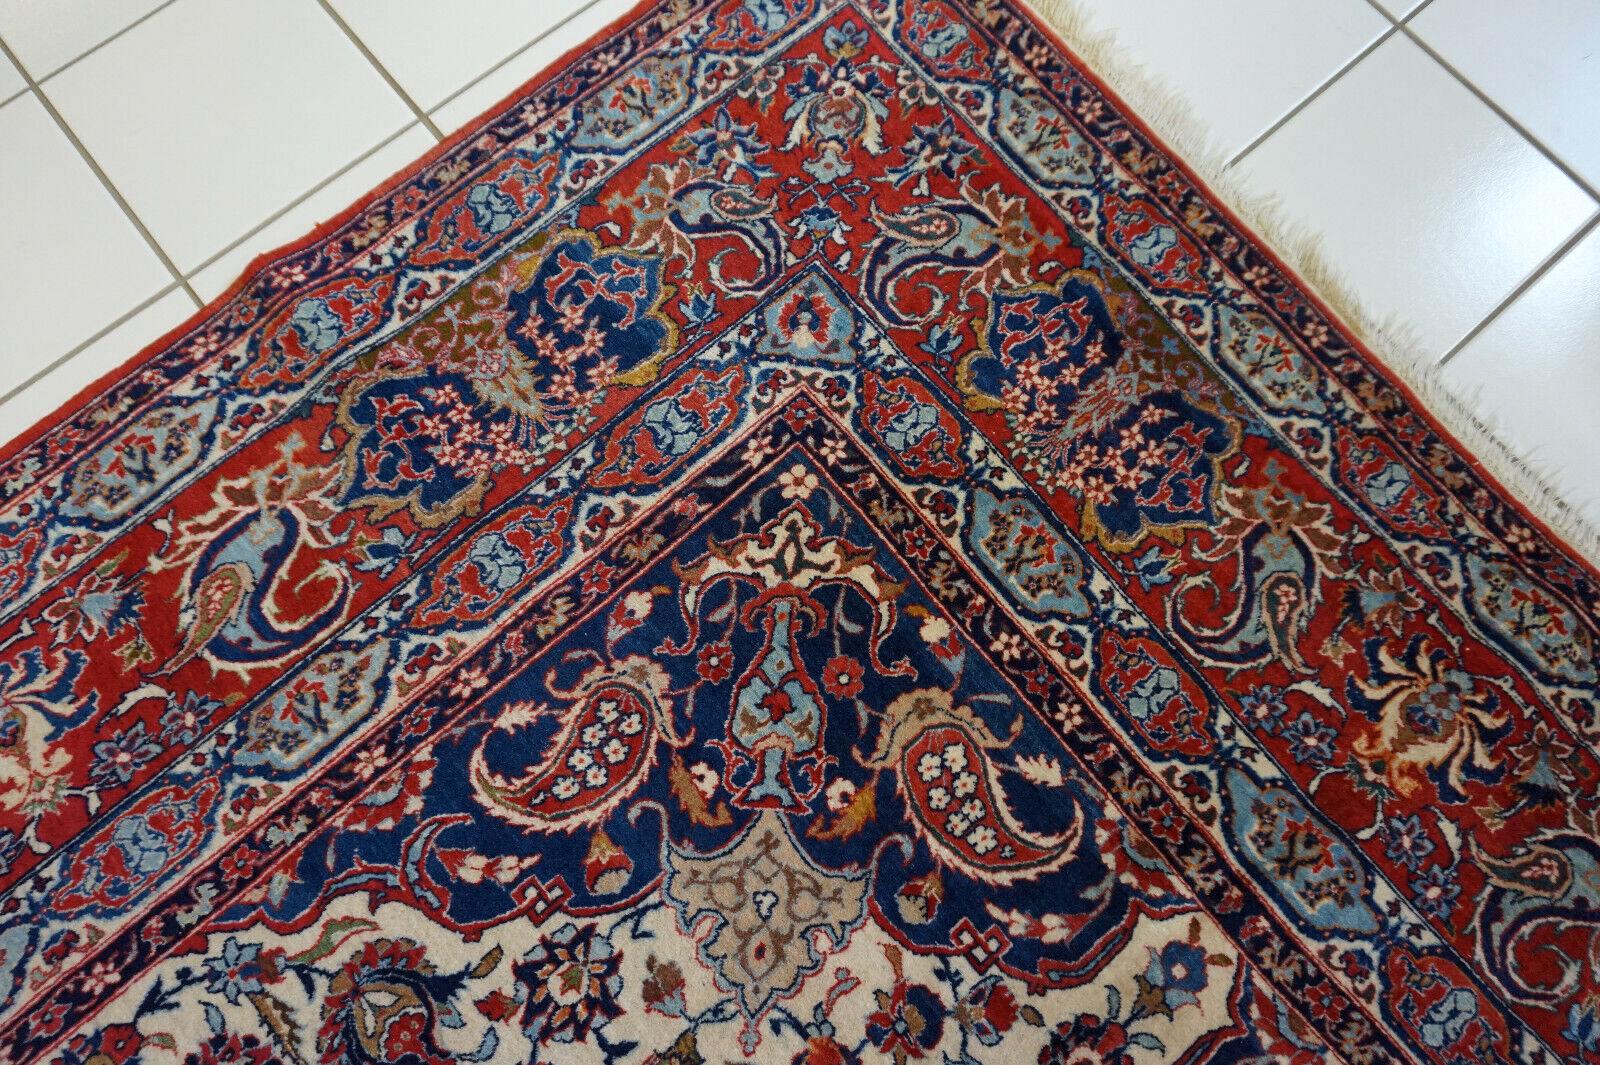 Handmade Antique Persian Style Isfahan Rug 4.5' x 7.7', 1920s - 1D53 For Sale 2